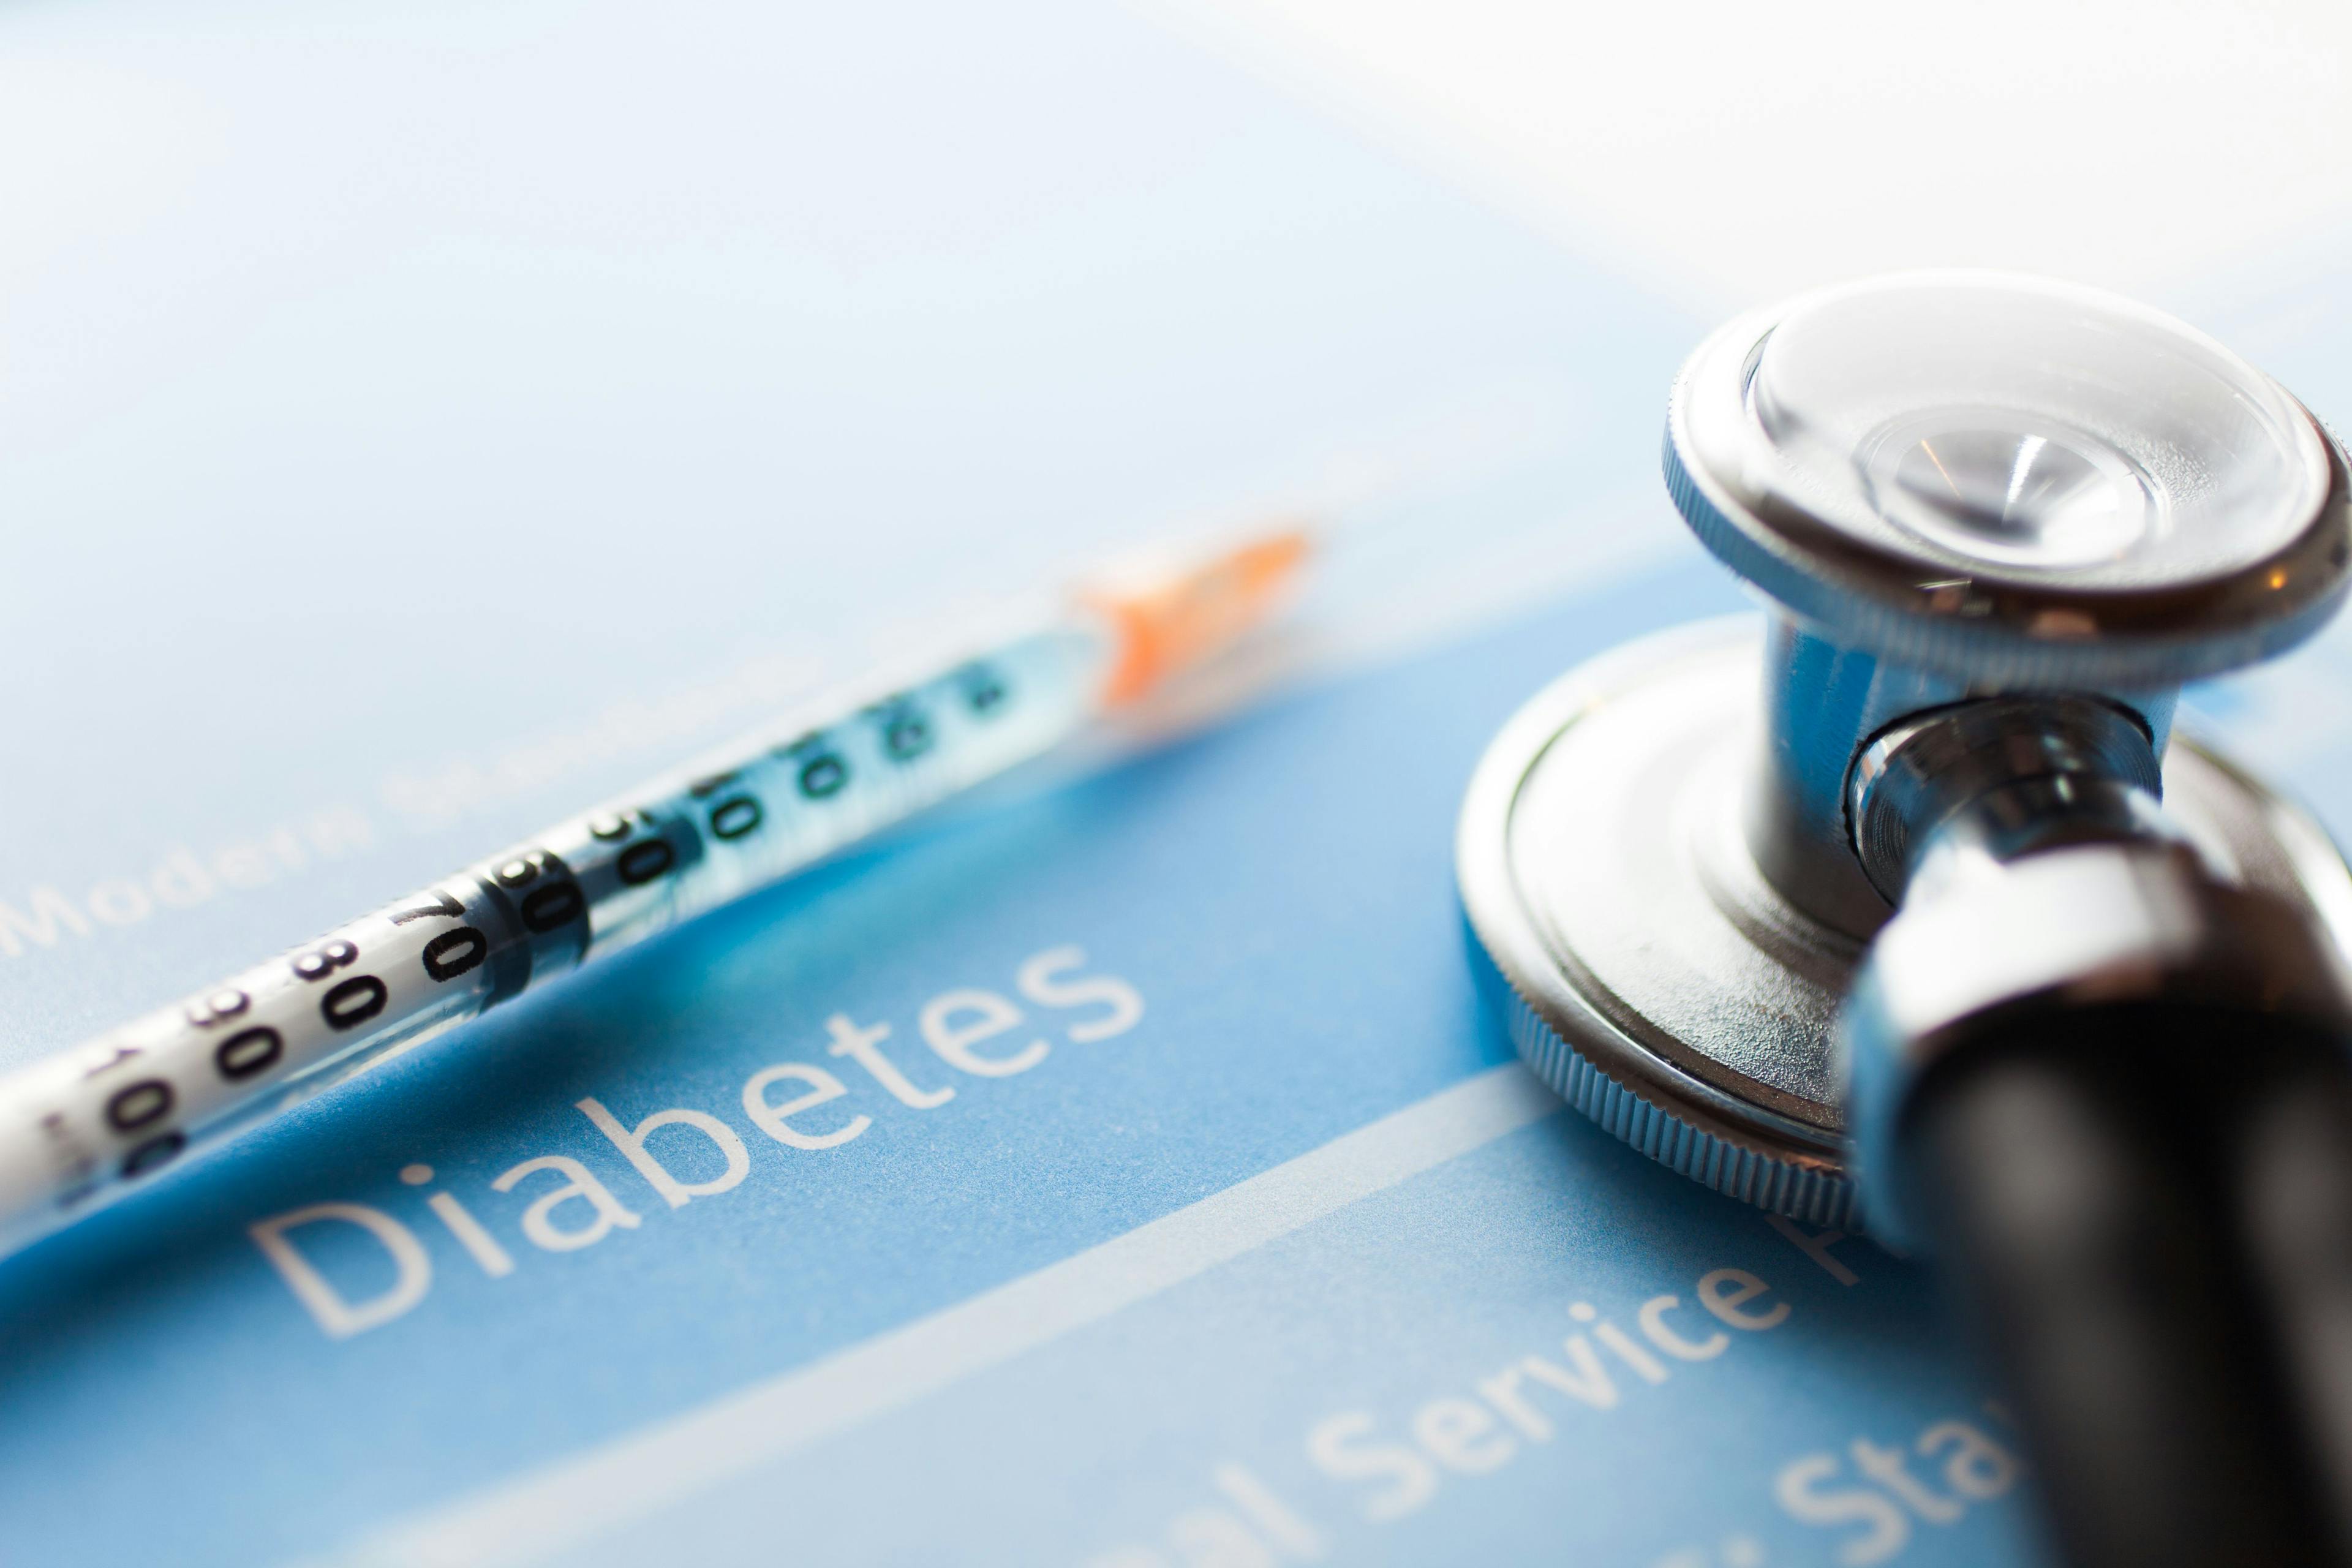 Updates to the American Diabetes Association Standards of Care in Diabetes